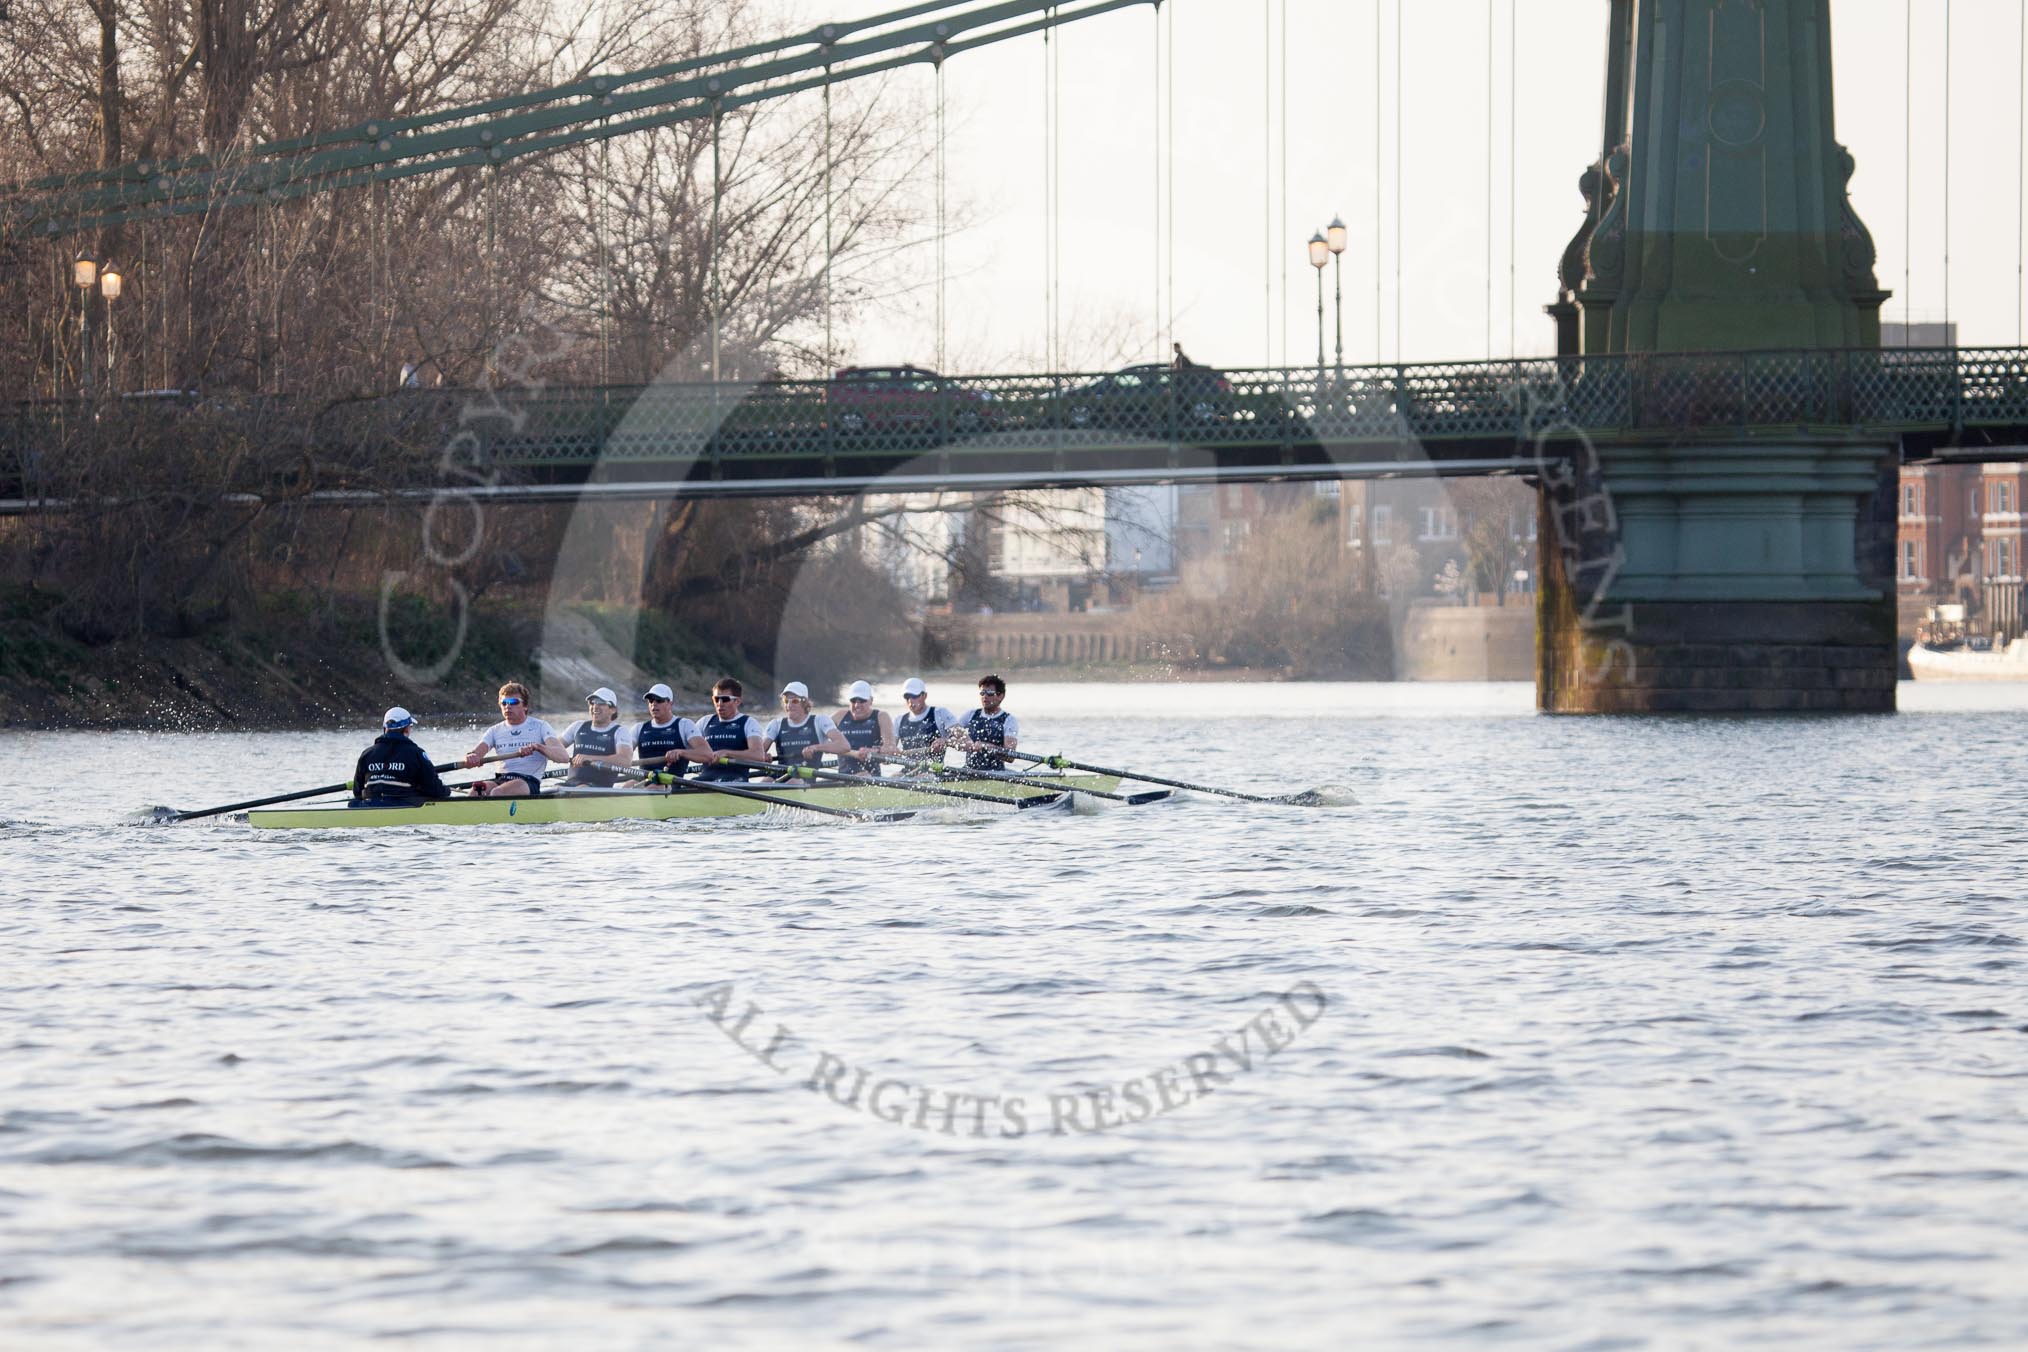 The Boat Race season 2014 - fixture OUBC vs German U23: The OUBC boat approaching Hammersmith Bridge..
River Thames between Putney Bridge and Chiswick Bridge,



on 08 March 2014 at 16:52, image #114